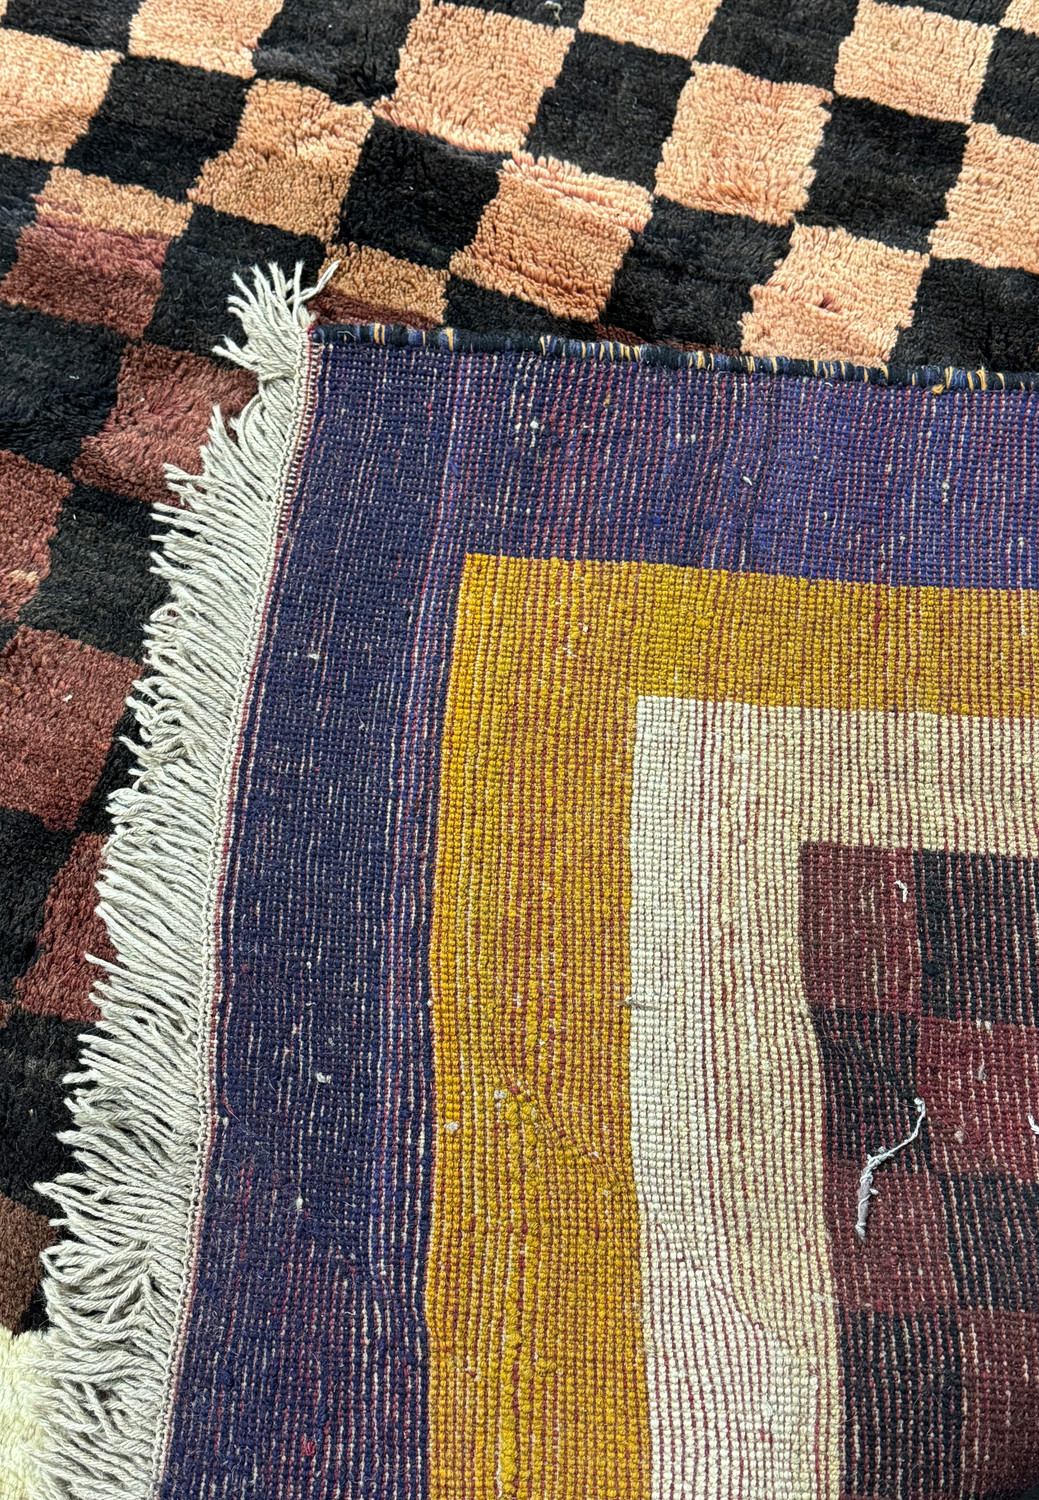 Detailed image of the corner of a modern Nepal rug, showing the fringe and the transition between the checkerboard center and the bold border colors.